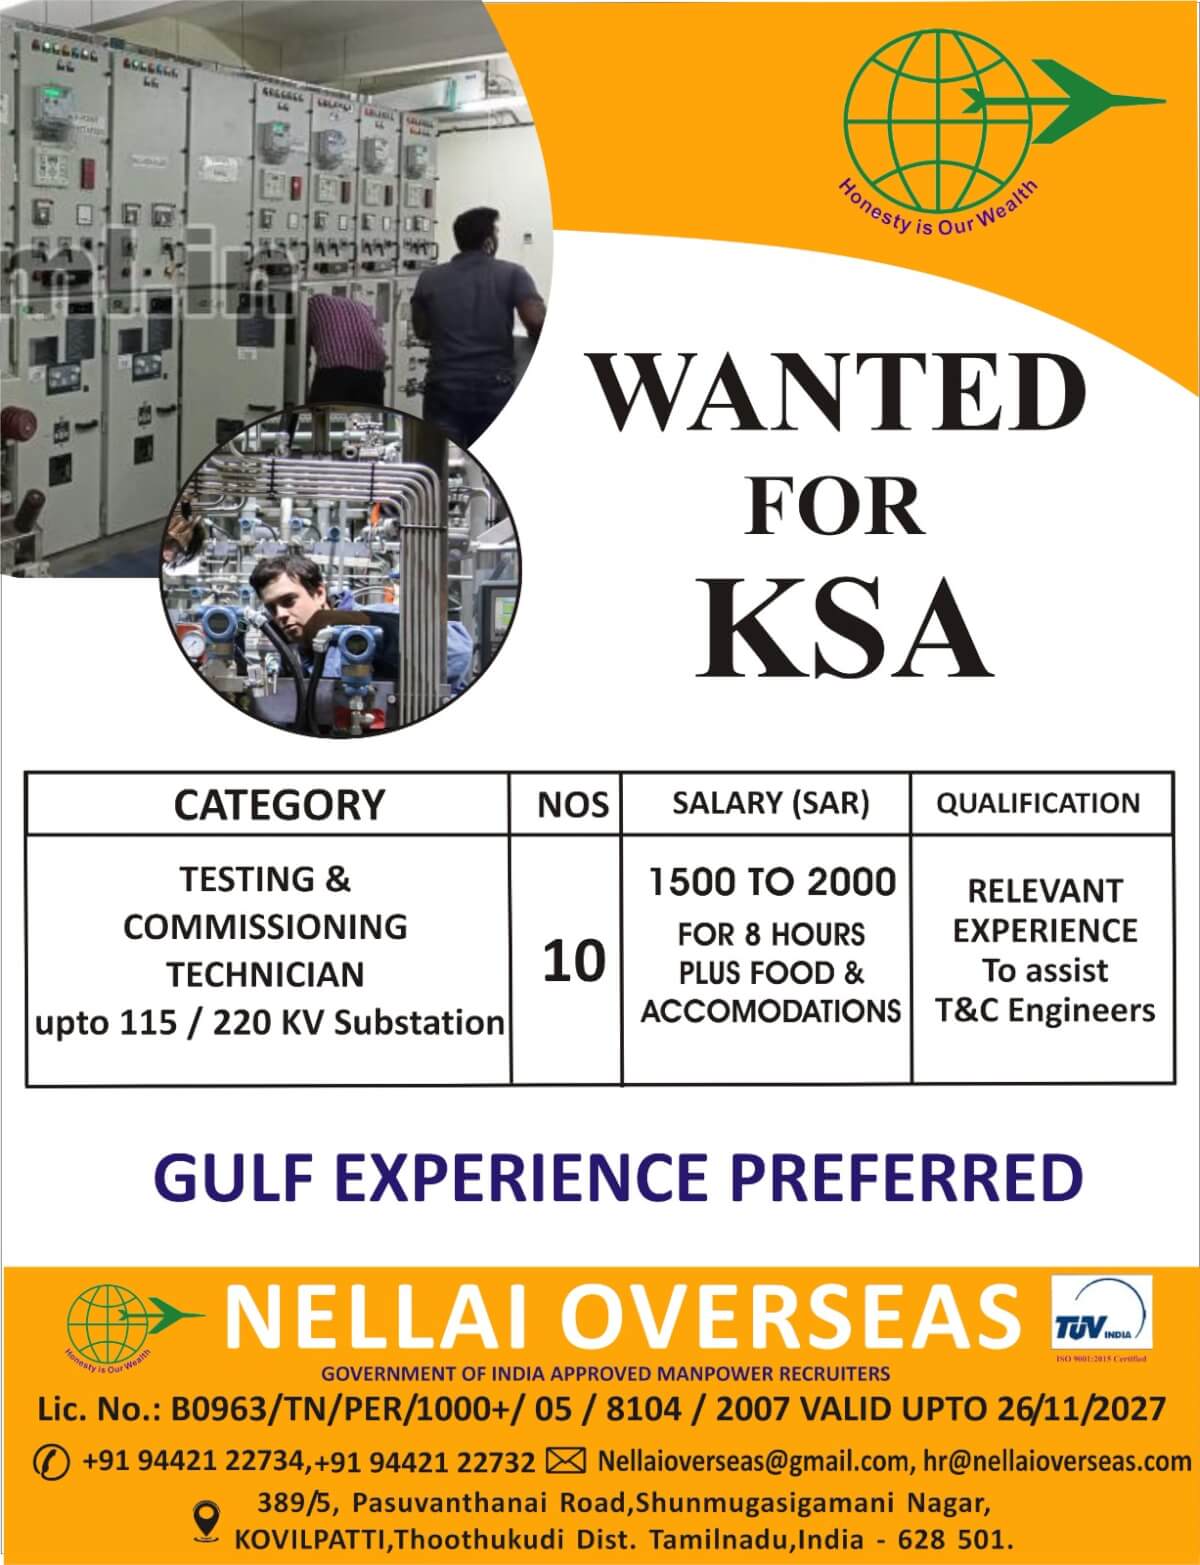 WANTED FOR KSA